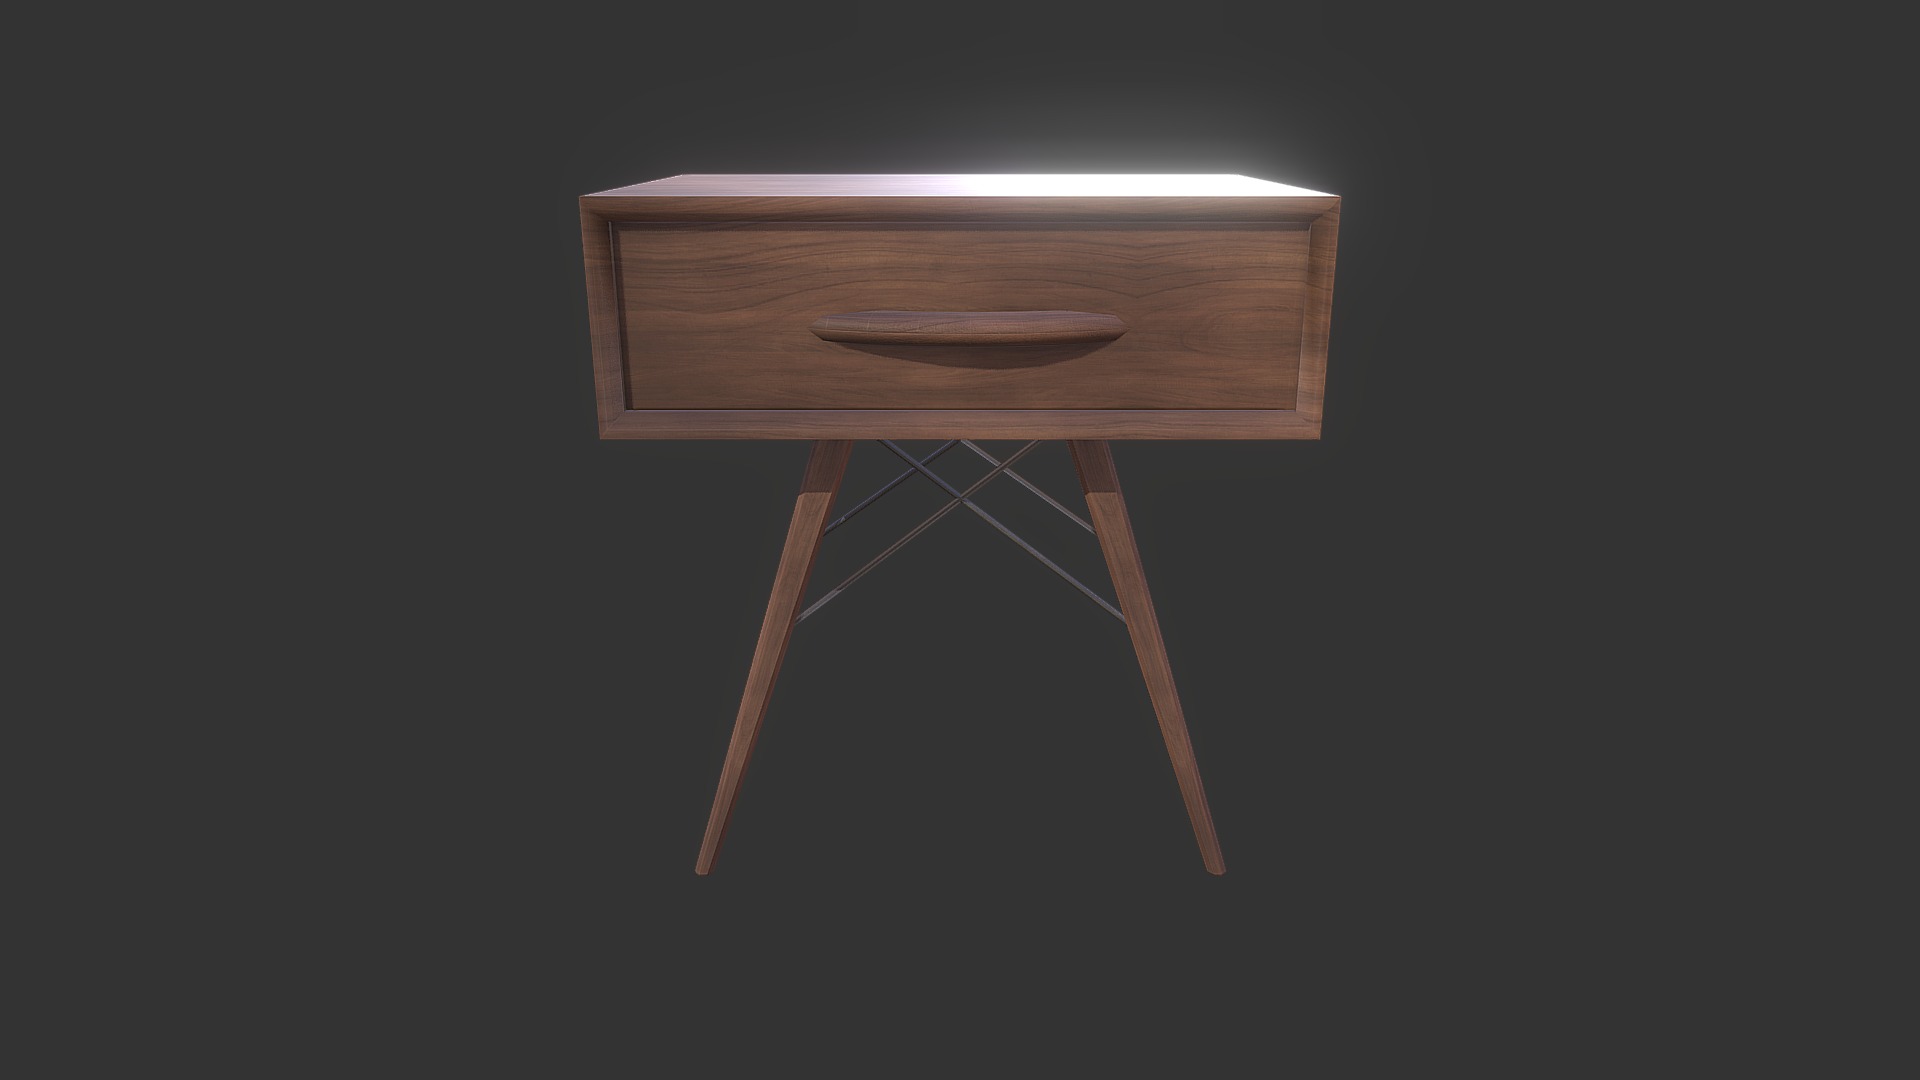 3D model Drawer - This is a 3D model of the Drawer. The 3D model is about a wooden table with a light on top.